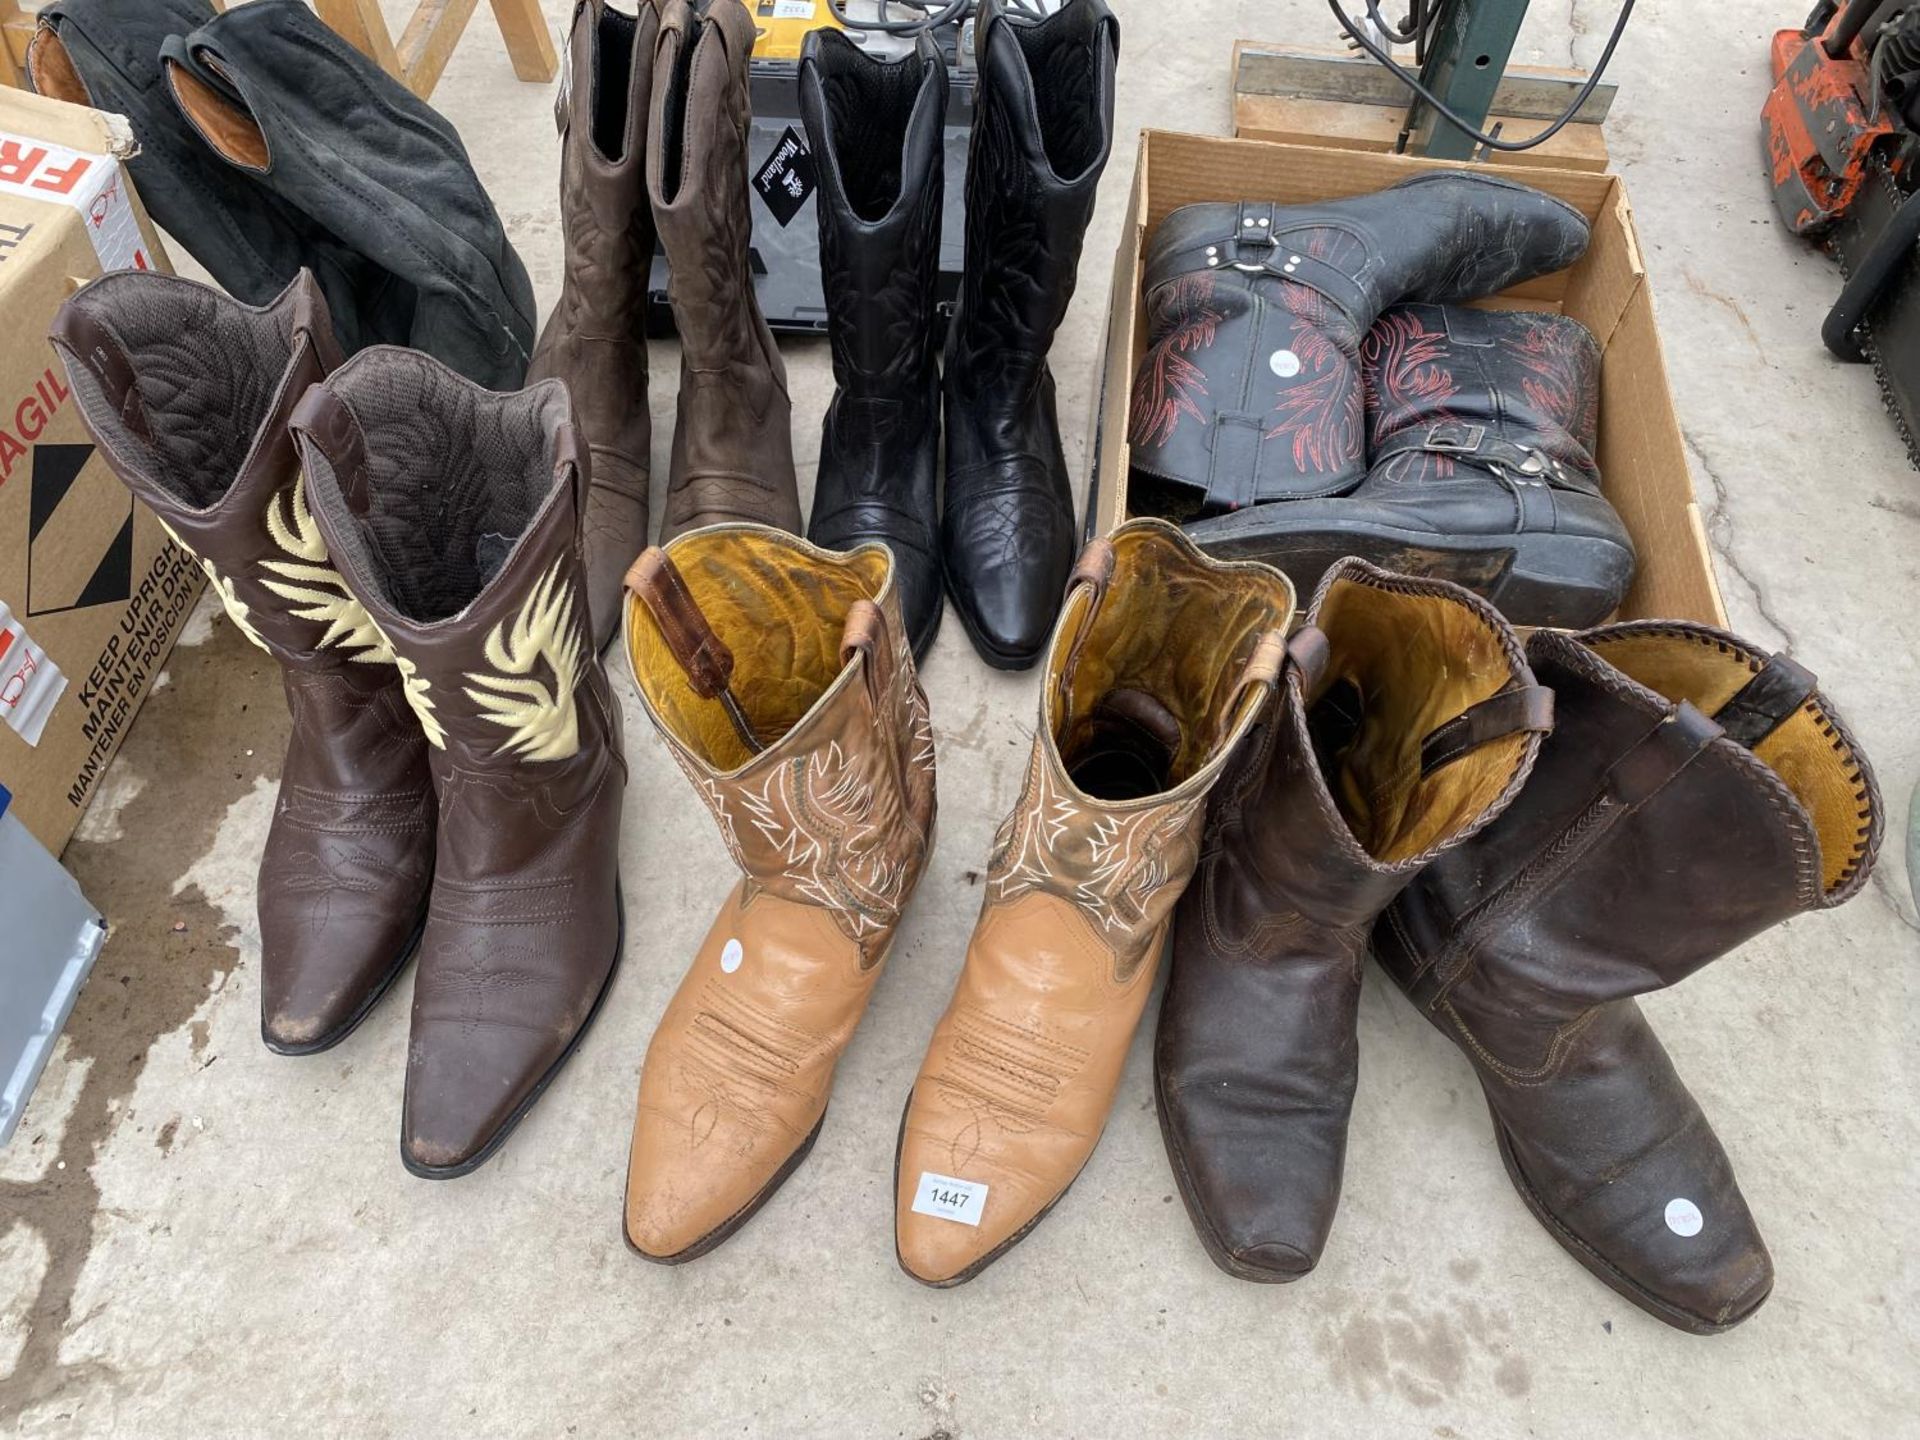 A LARGE COLLECTION OF GENTS COWBOY BOOTS FROM SIZE 10.5-12